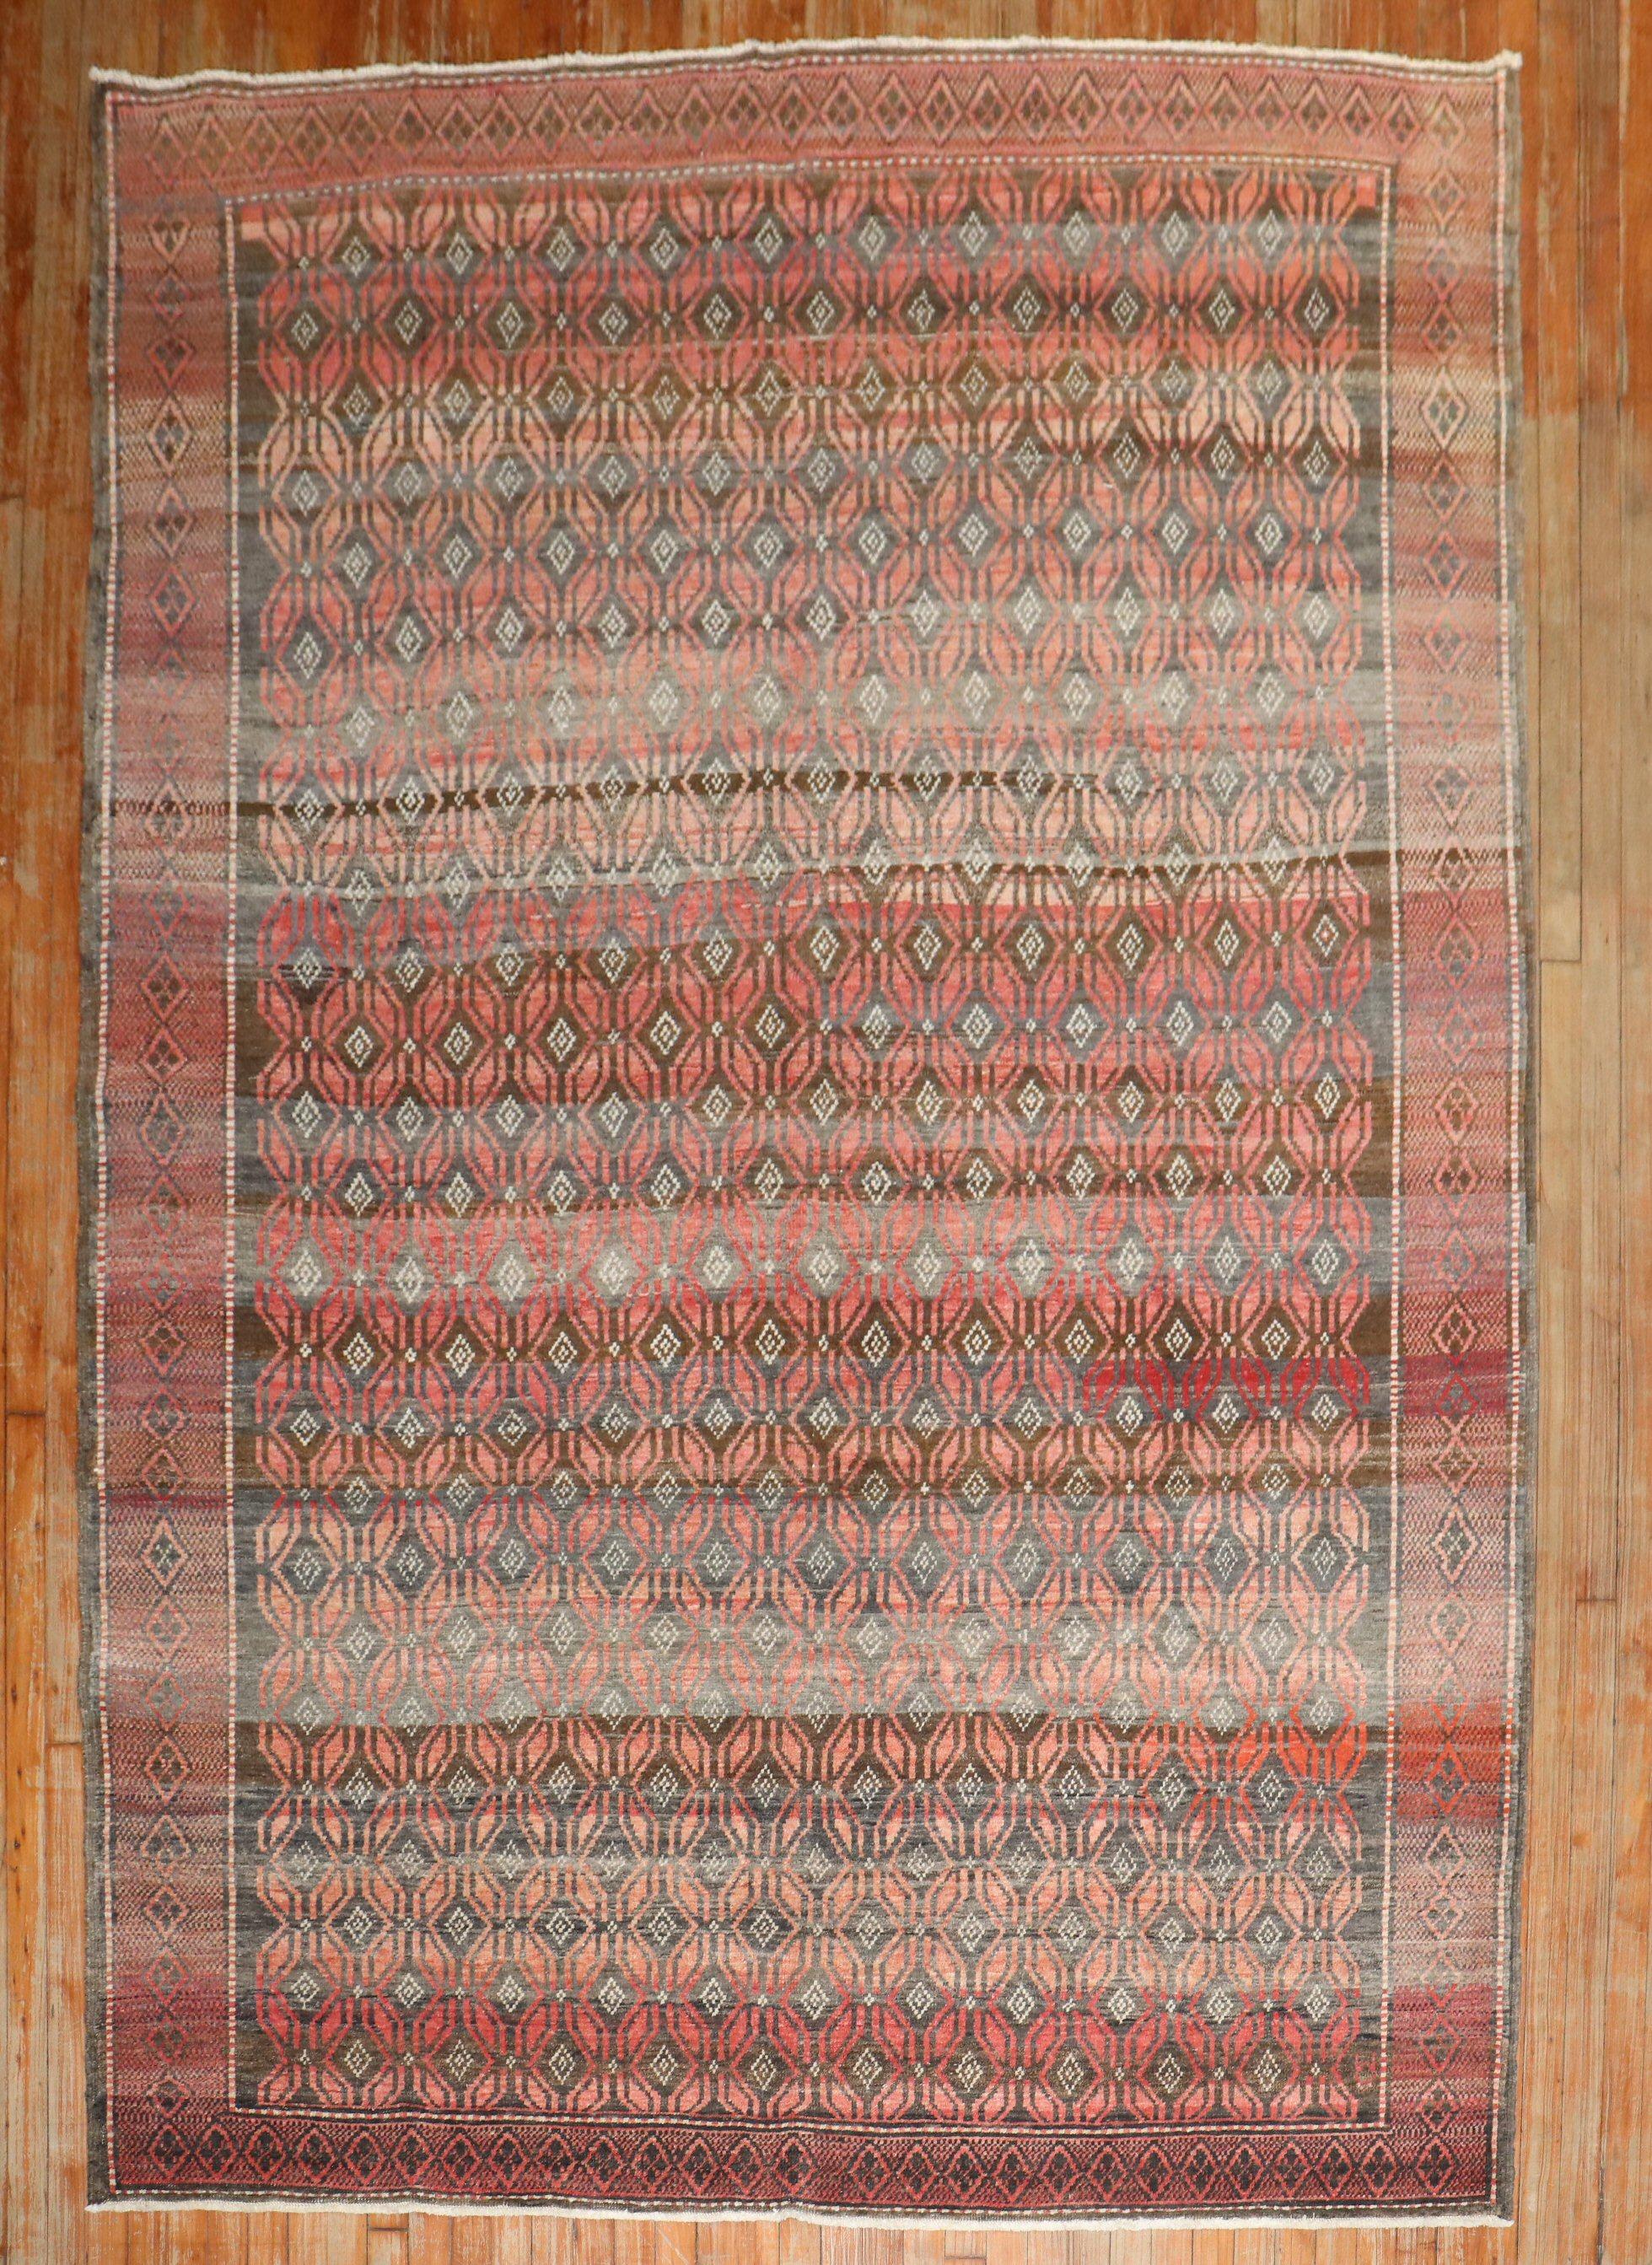 Mid 20th Century High Decorative Turkish Tribal Rug

6'8'' x 9'4''

Kars is a village located in Northeast of Turkey. The weavers in this area tend to make long runners and long odd size gallery rugs, with large medallions often in the form of large